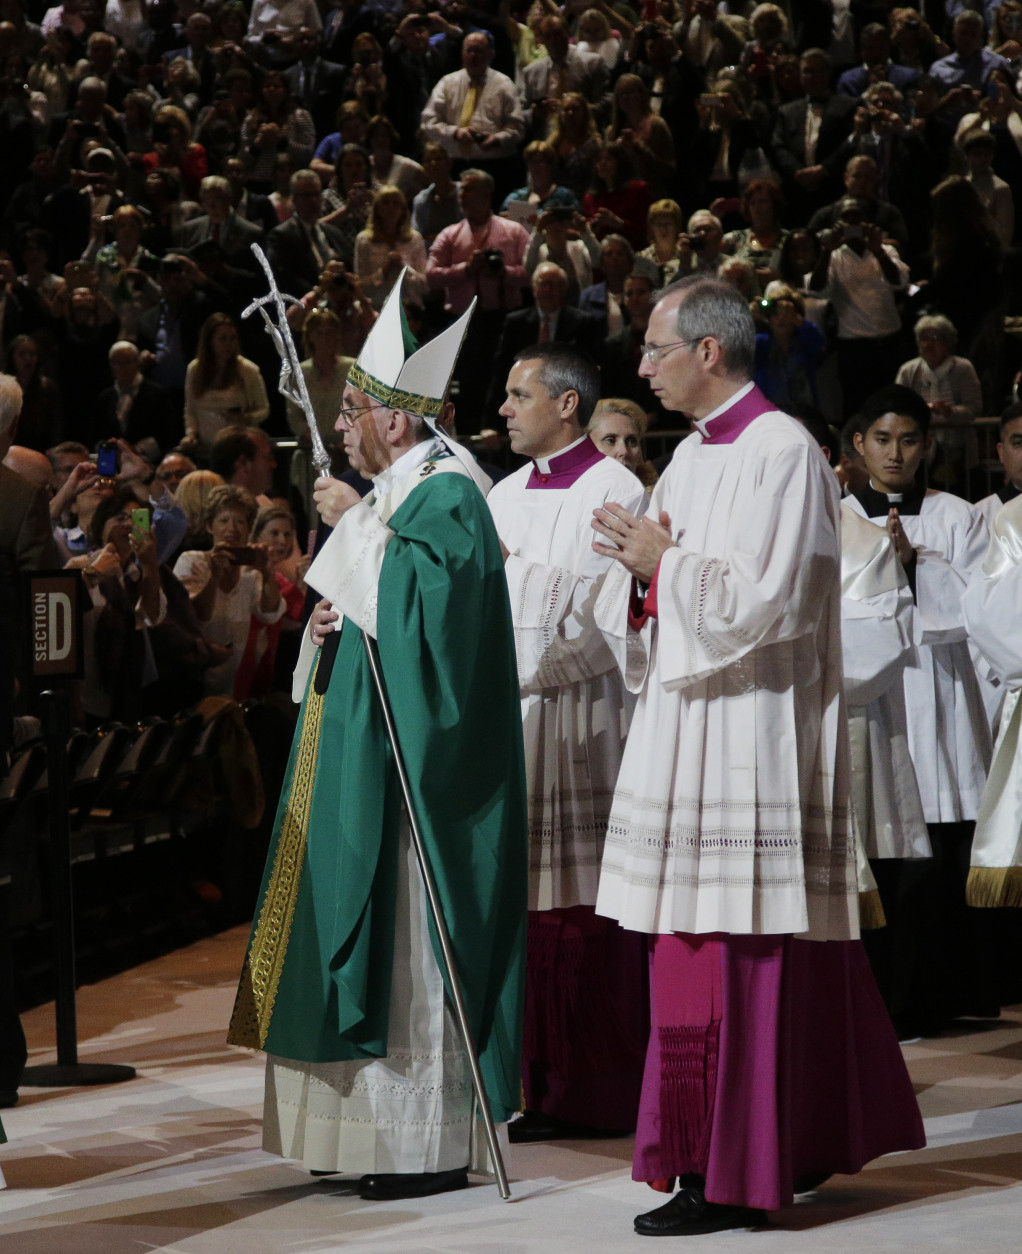 Pope Francis arrives to celebrate Mass at Madison Square Garden, Thursday, Sept. 24, 2015, in New York. (AP Photo/Julie Jacobson, Pool)